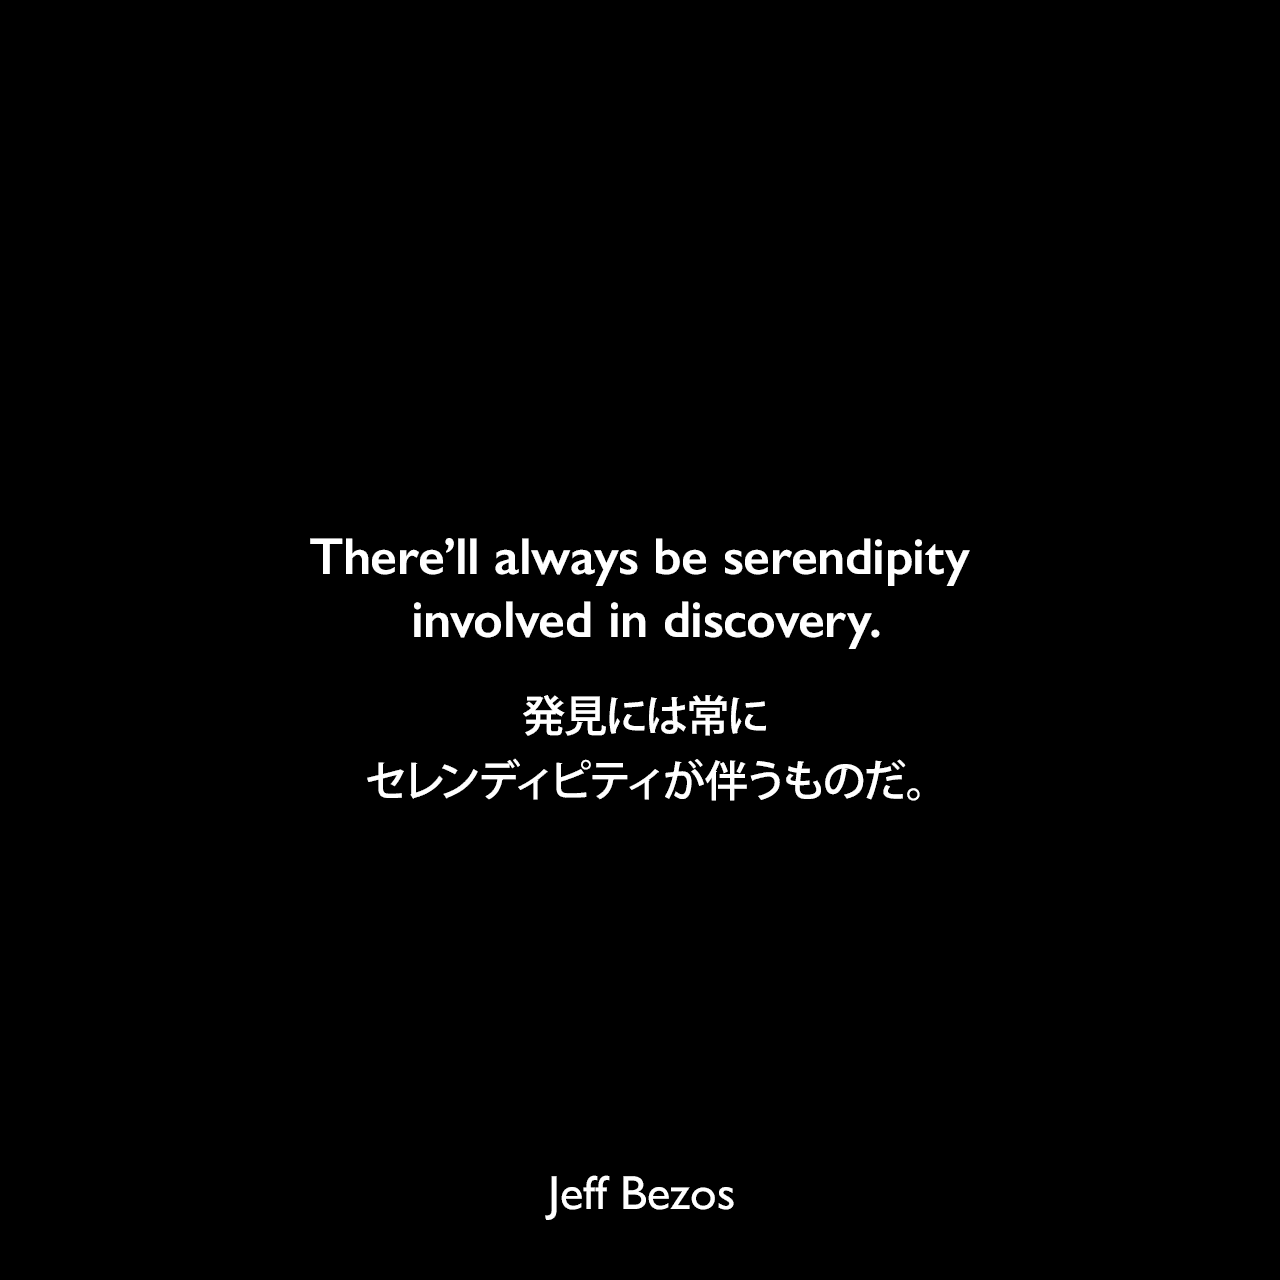 There’ll always be serendipity involved in discovery.発見には常にセレンディピティが伴うものだ。Jeff Bezos